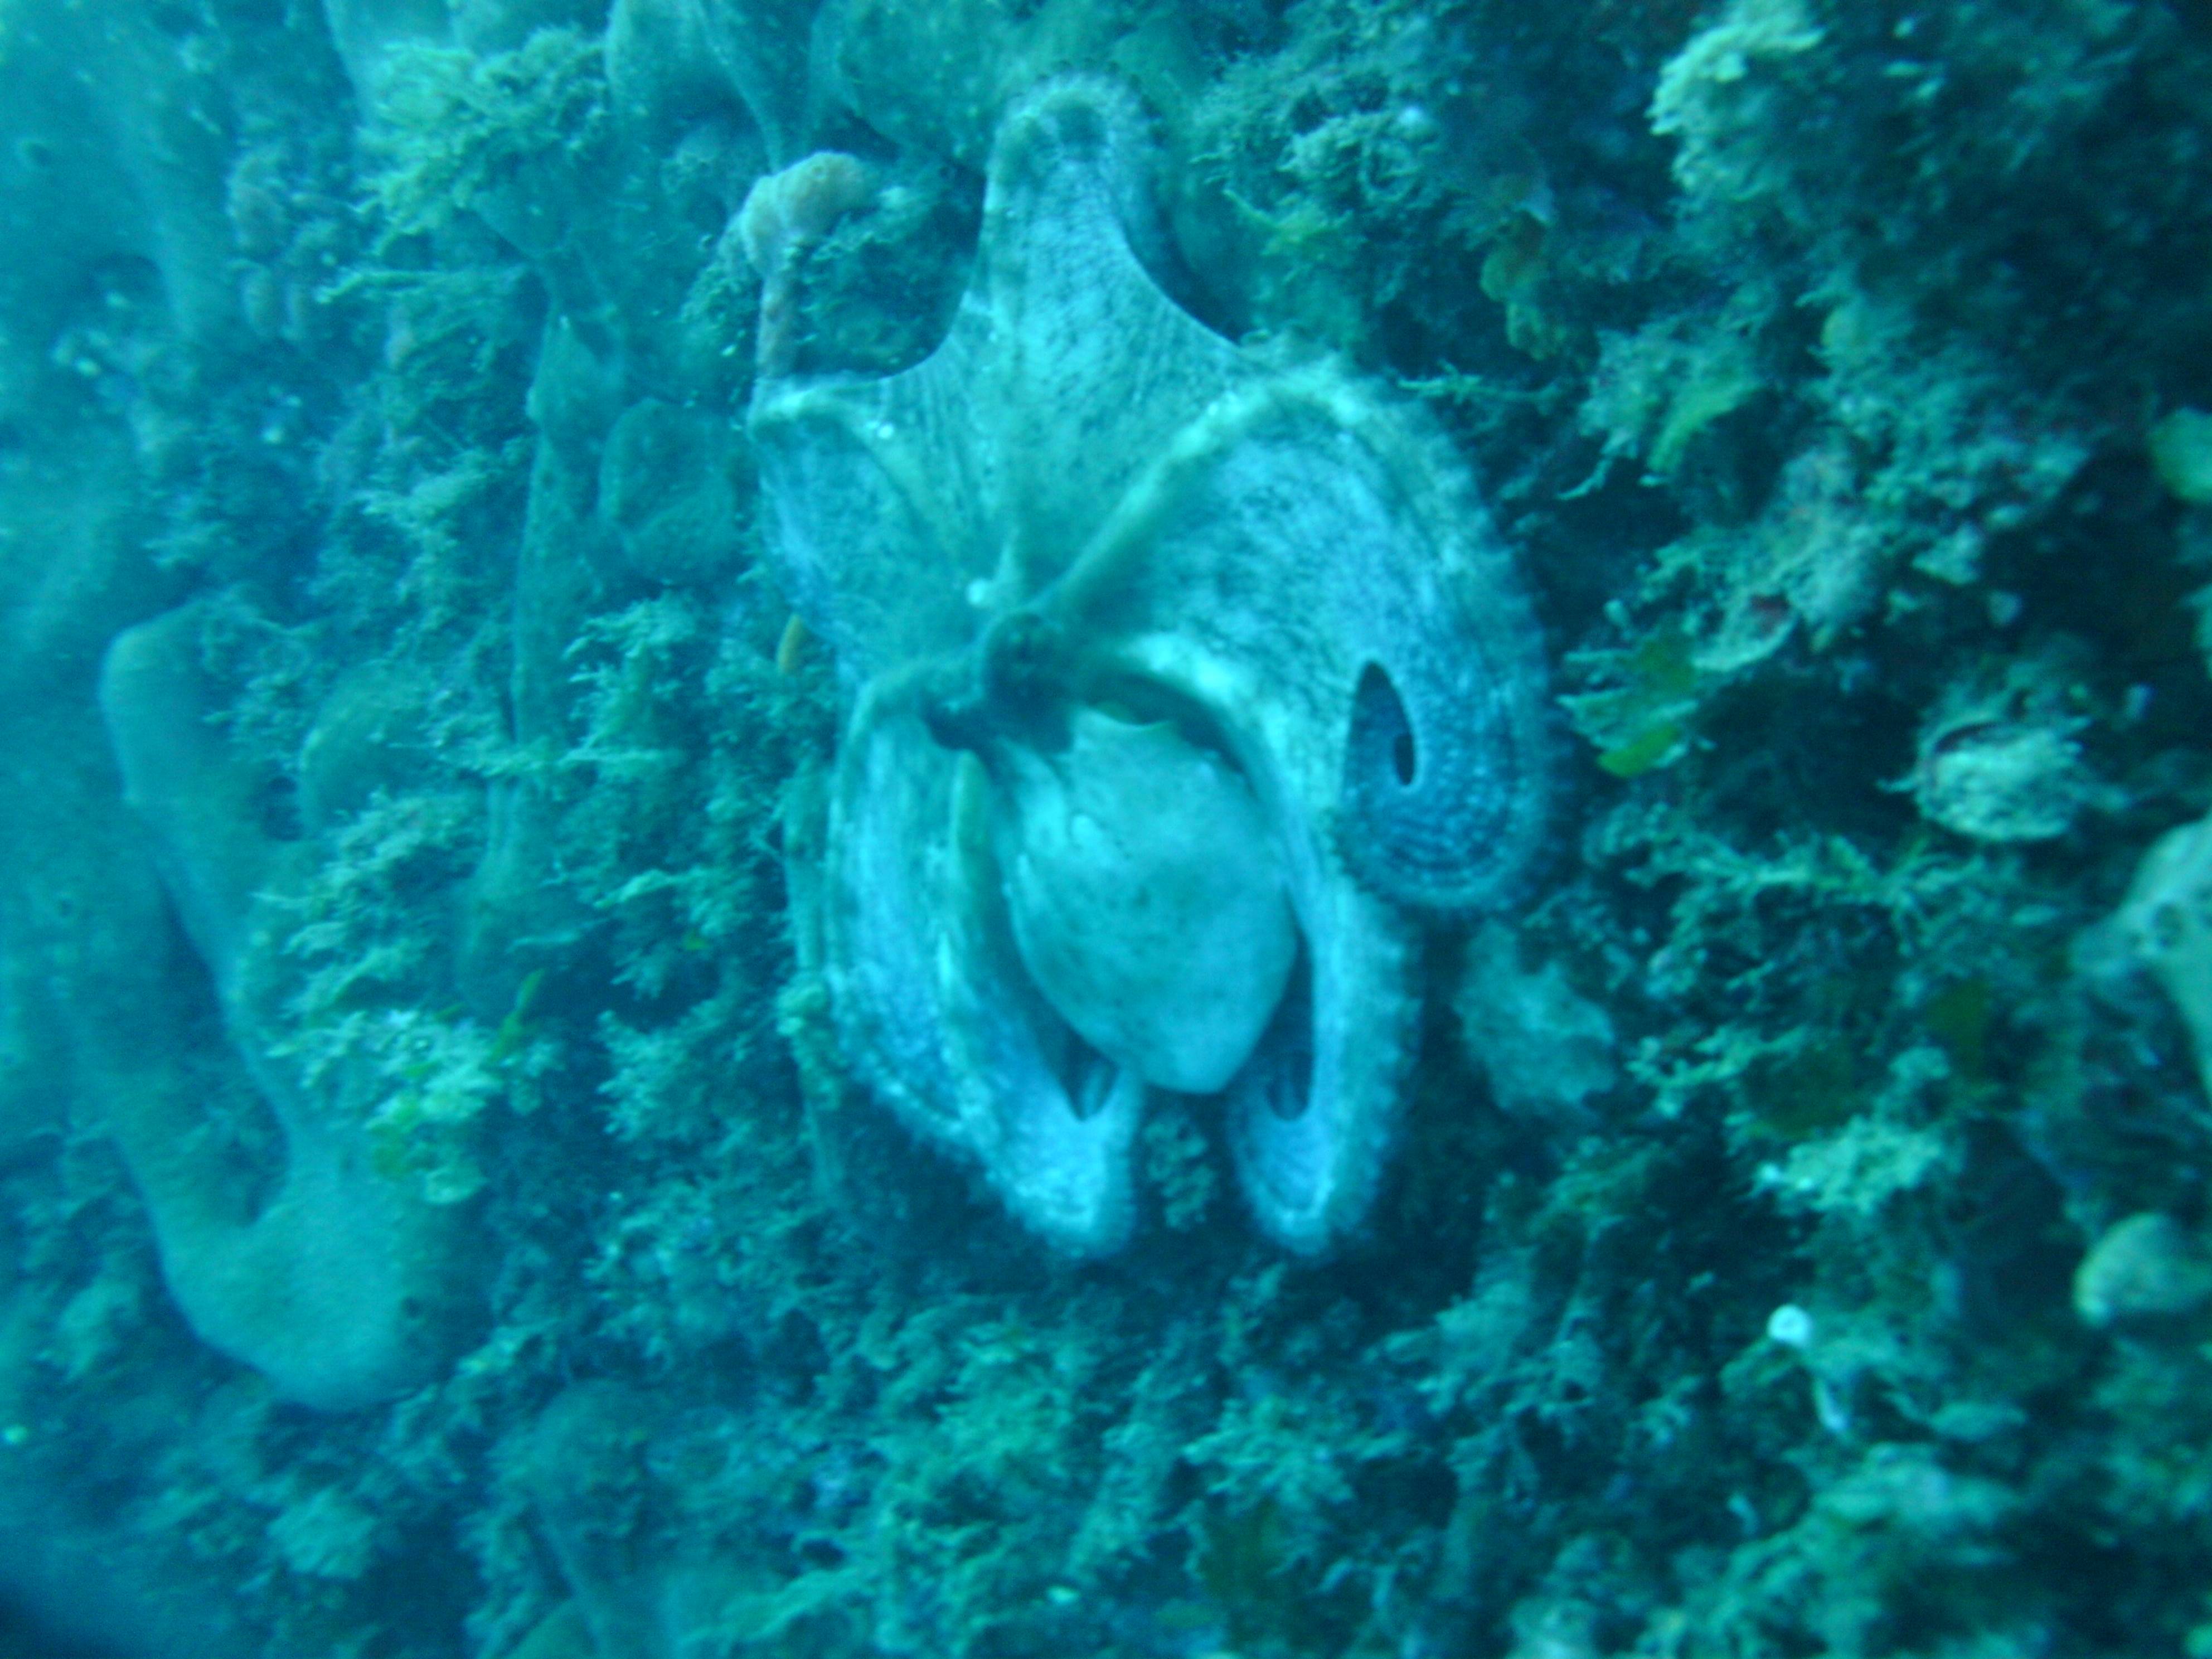 An octopus at about 20 meters.